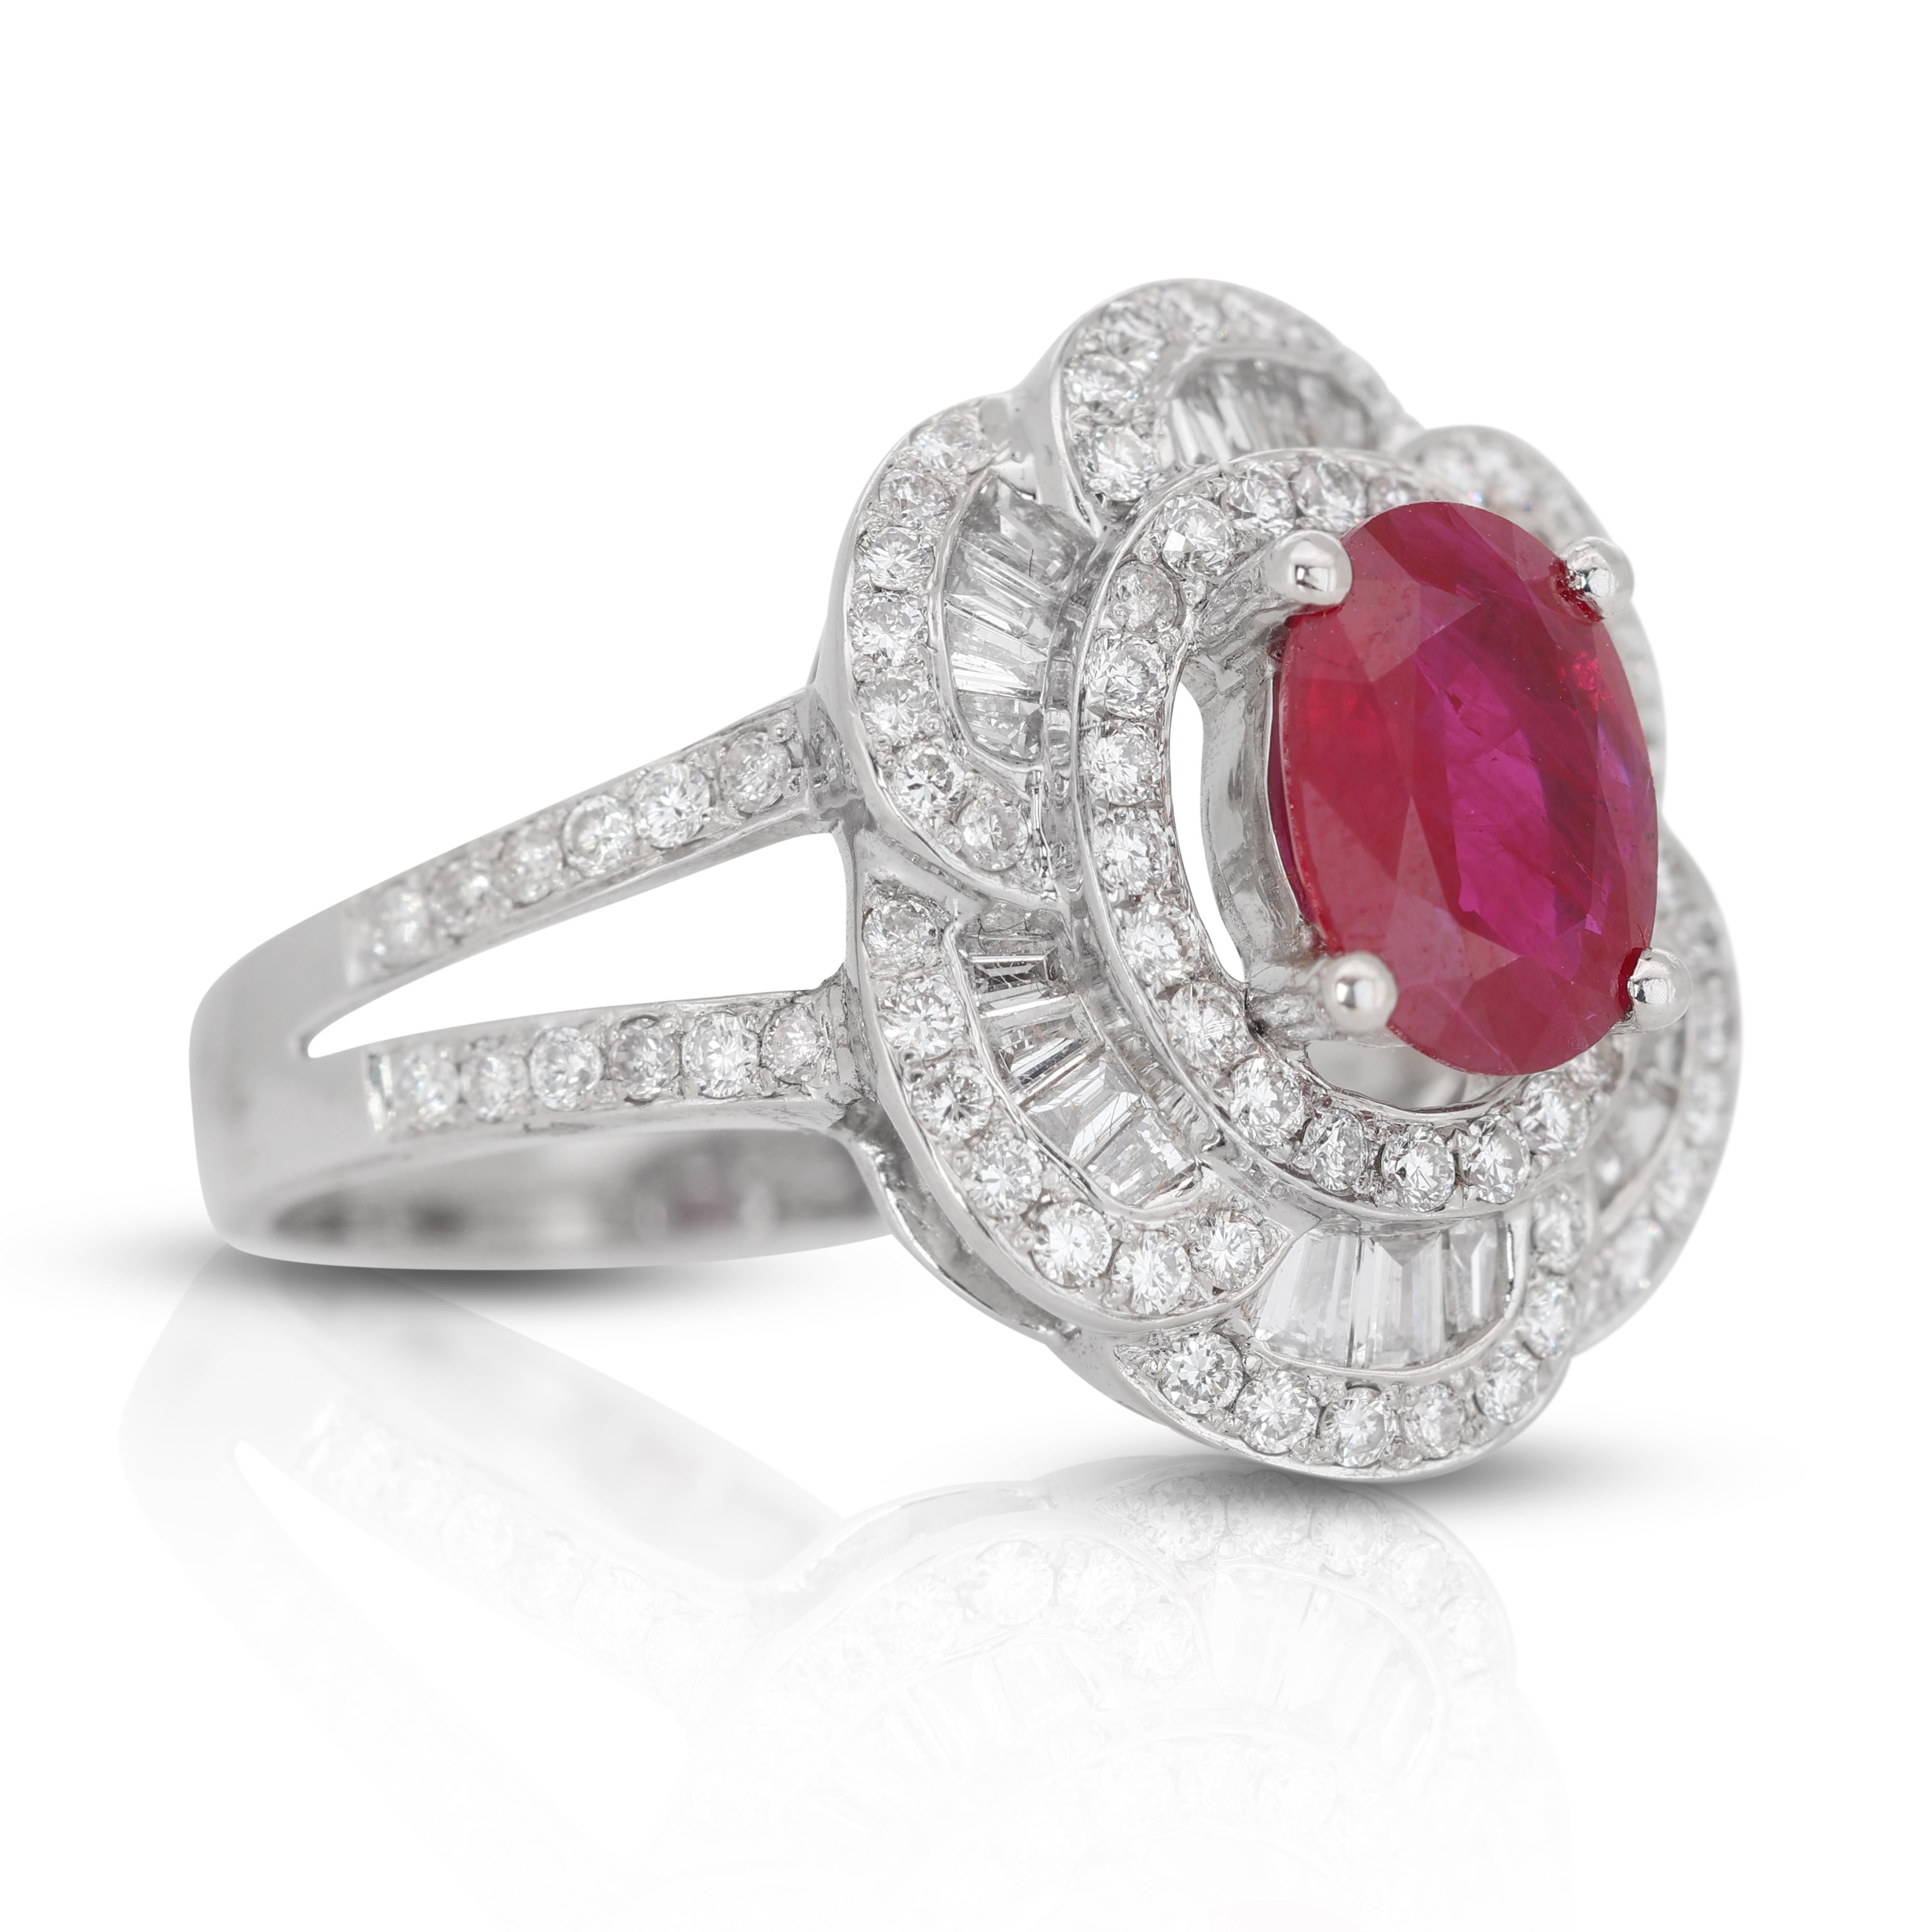 Regal 18k White Gold Ruby and Diamond Double Halo Ring w/2.36 ct - IGI Certified

Introducing this 18k White Gold Double Halo Ring that exudes sophistication and a timeless appeal. At the centerpiece of this luxurious ring is a stunning 1.21 ct oval